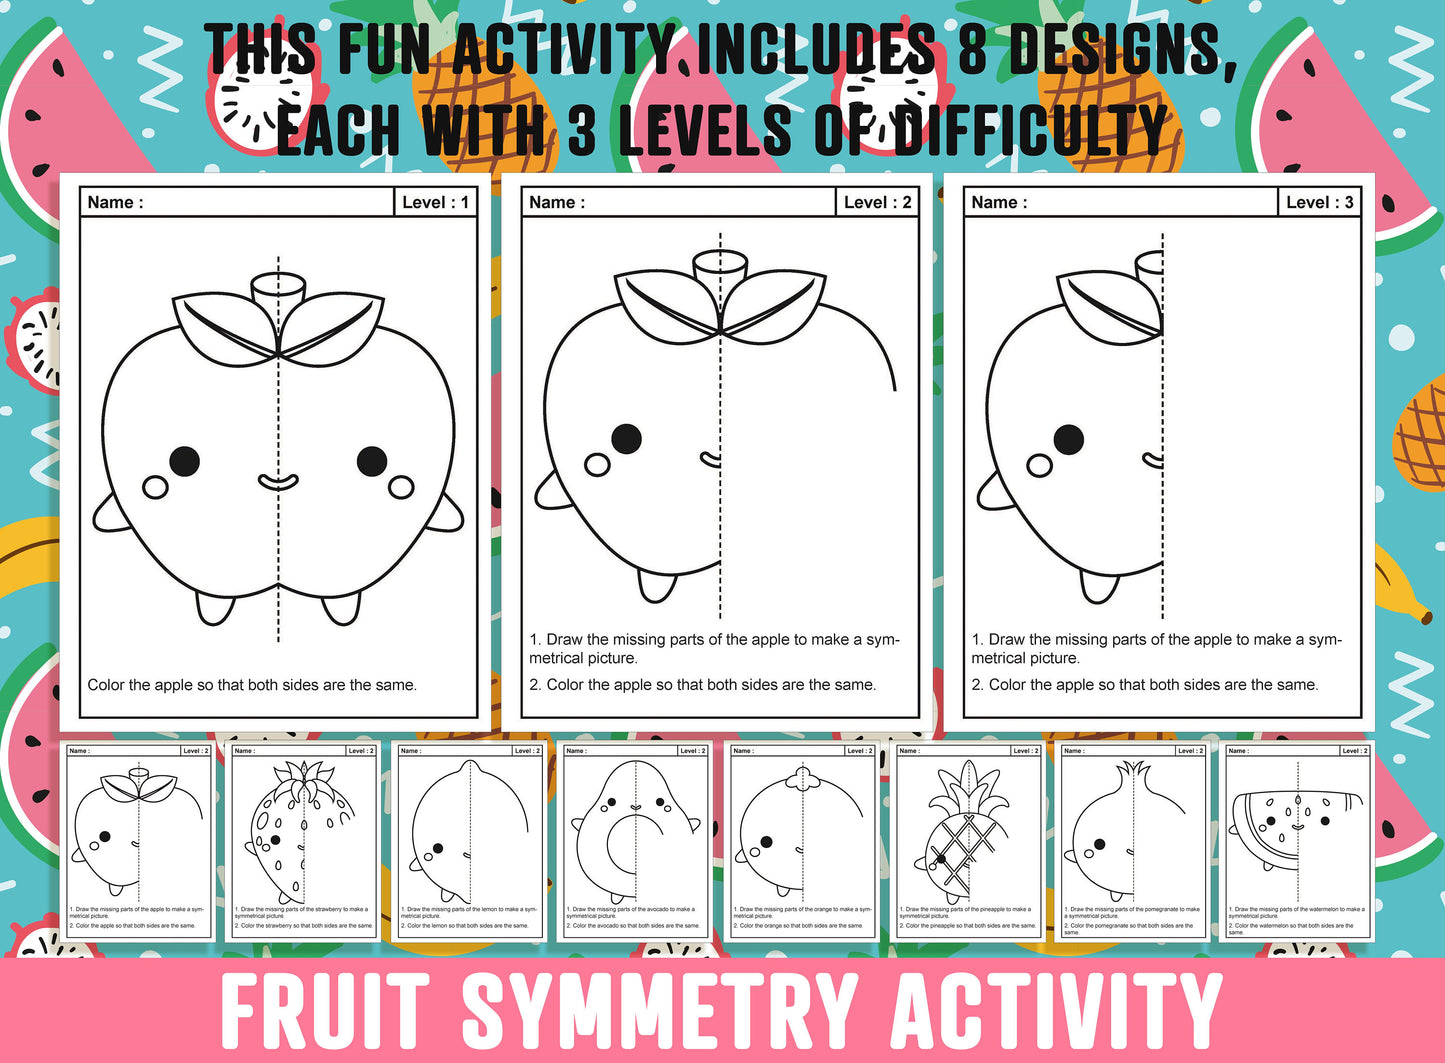 Fruit Symmetry Worksheet, Fruit Theme Lines of Symmetry Activity, 24 Pages, Includes 8 Designs, Each With 3 Levels of Difficulty